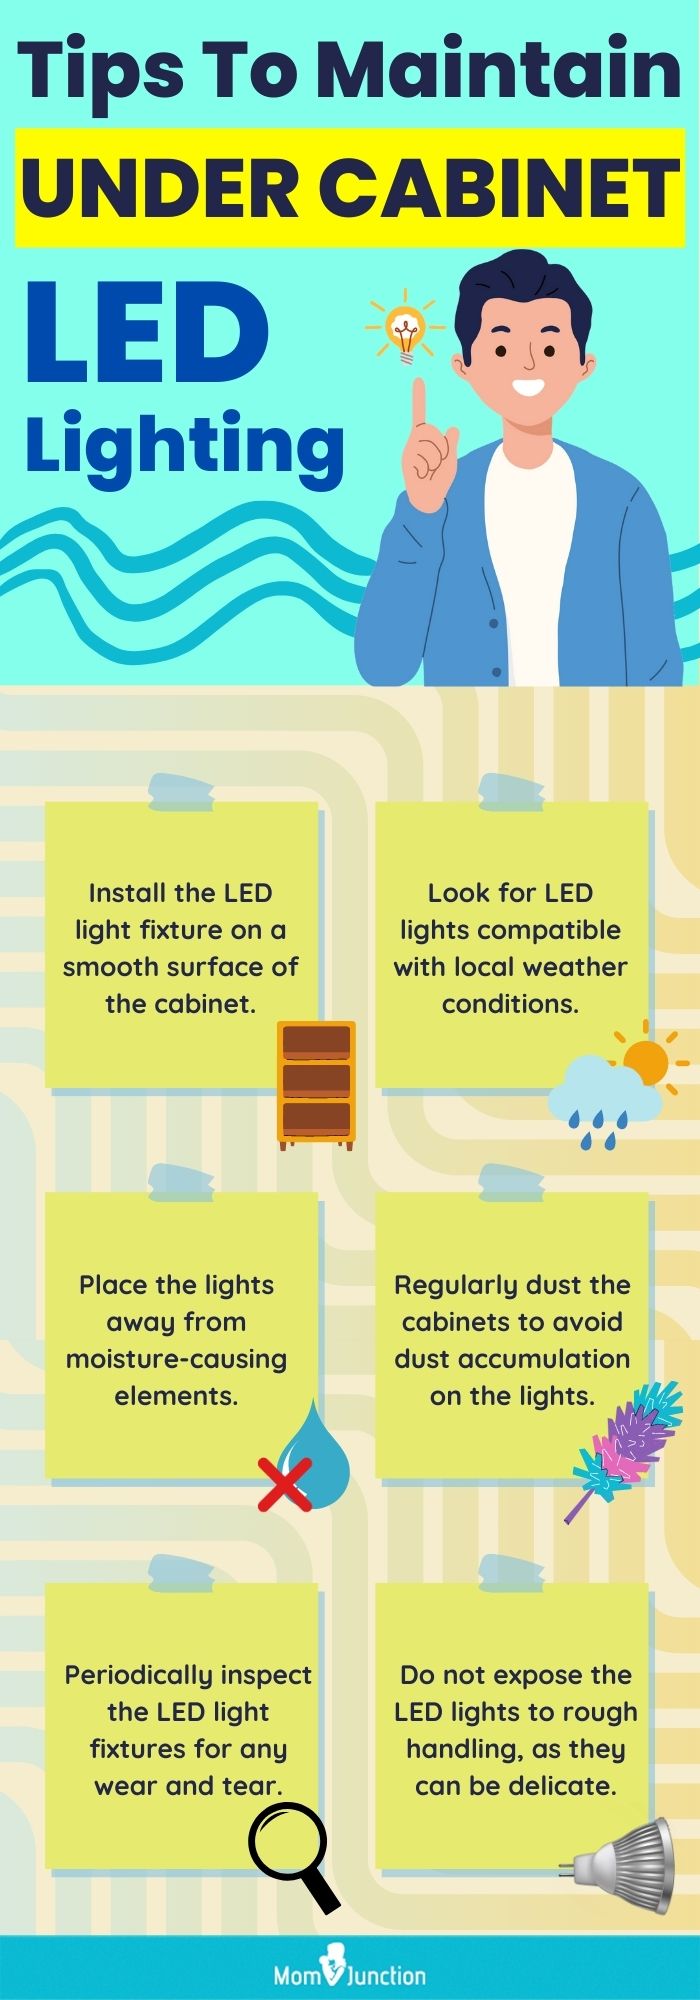 Tips To Maintain Under Cabinet LED Lighting (infographic)